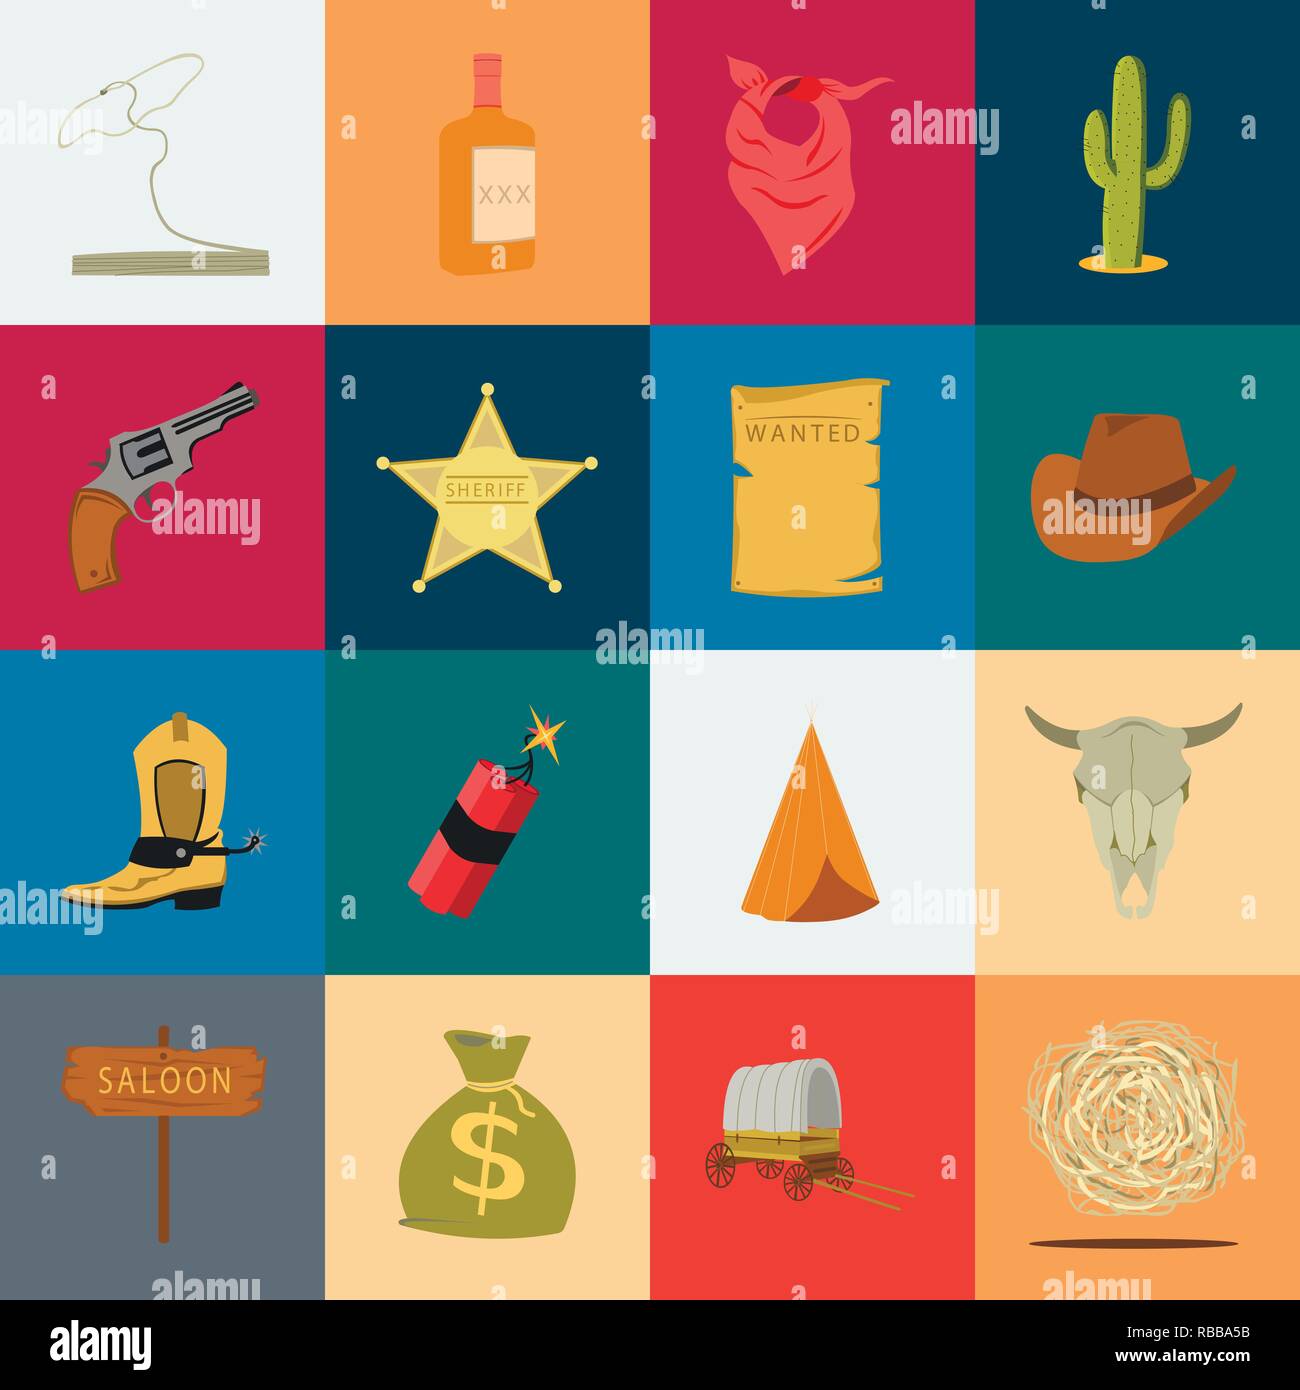 accessories,alcohol,america,animal,attributes,badge,bag,bandana,boots,bottle,cactus,cap,carriage,cartoon,collection,concept,cowboy,custom,desert,design,dynamite,gold,gun,hat,icon,illustration,indian,leather,loss,poster,ranch,rope,saloon,set,sheriff,sign,skull,star,state,symbol,texas,tumbleweed,vector,wanted,west,western,whiskey,wigwam,wild,wilderness Vector Vectors , Stock Vector